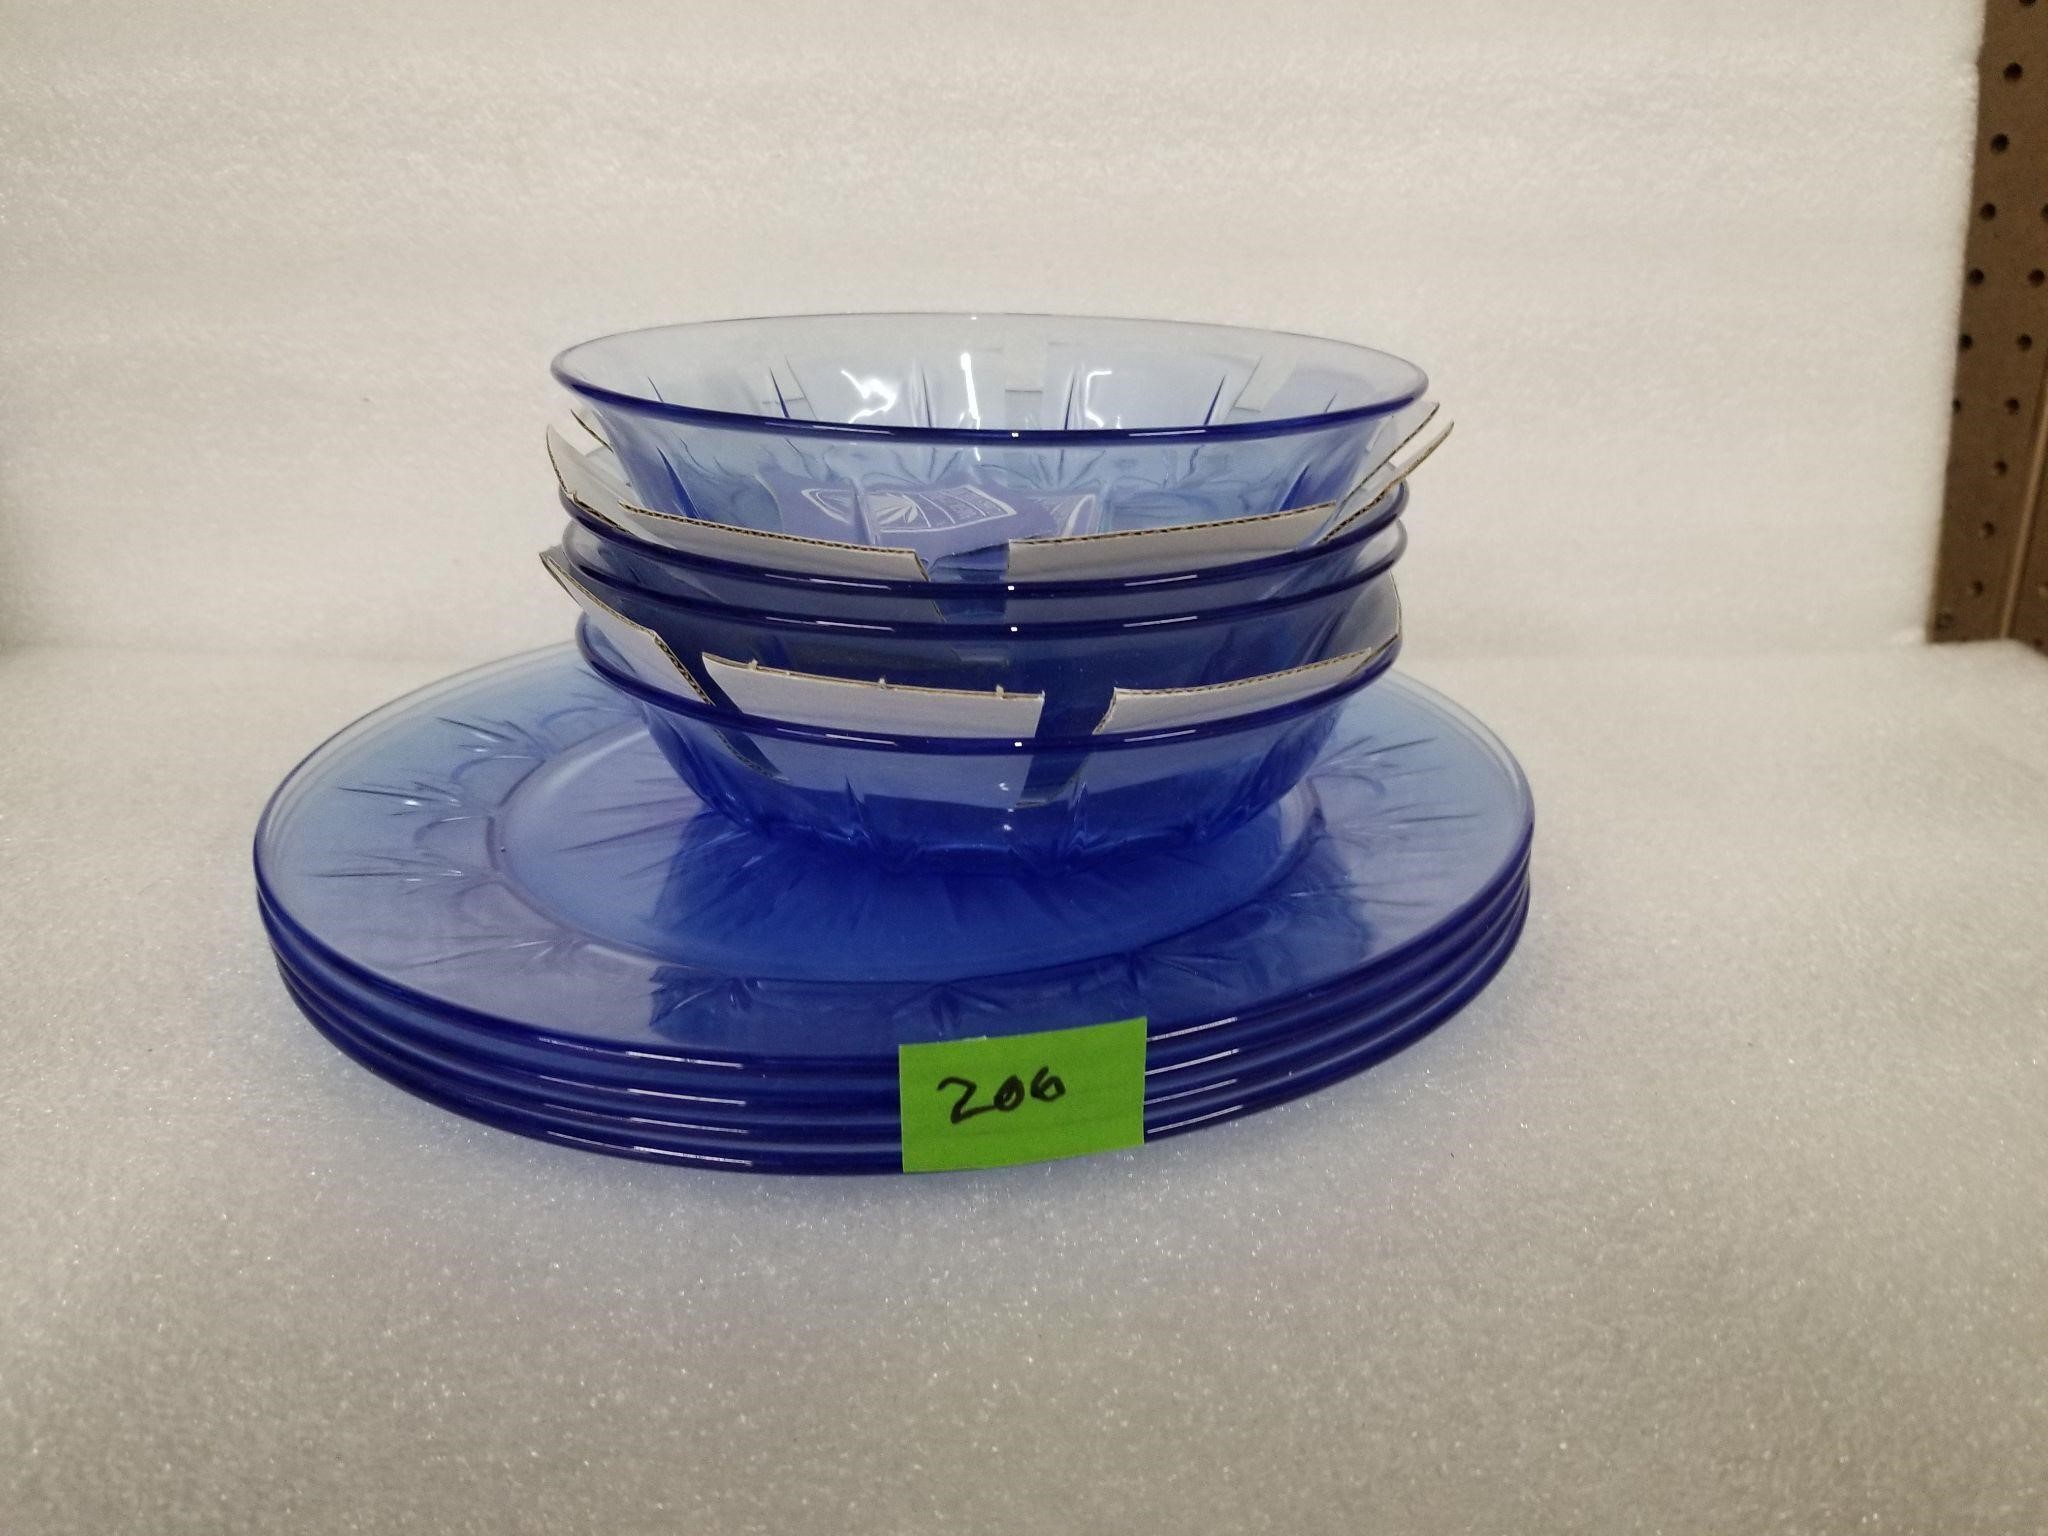 American Blue Classics Collection Plates and Bowls